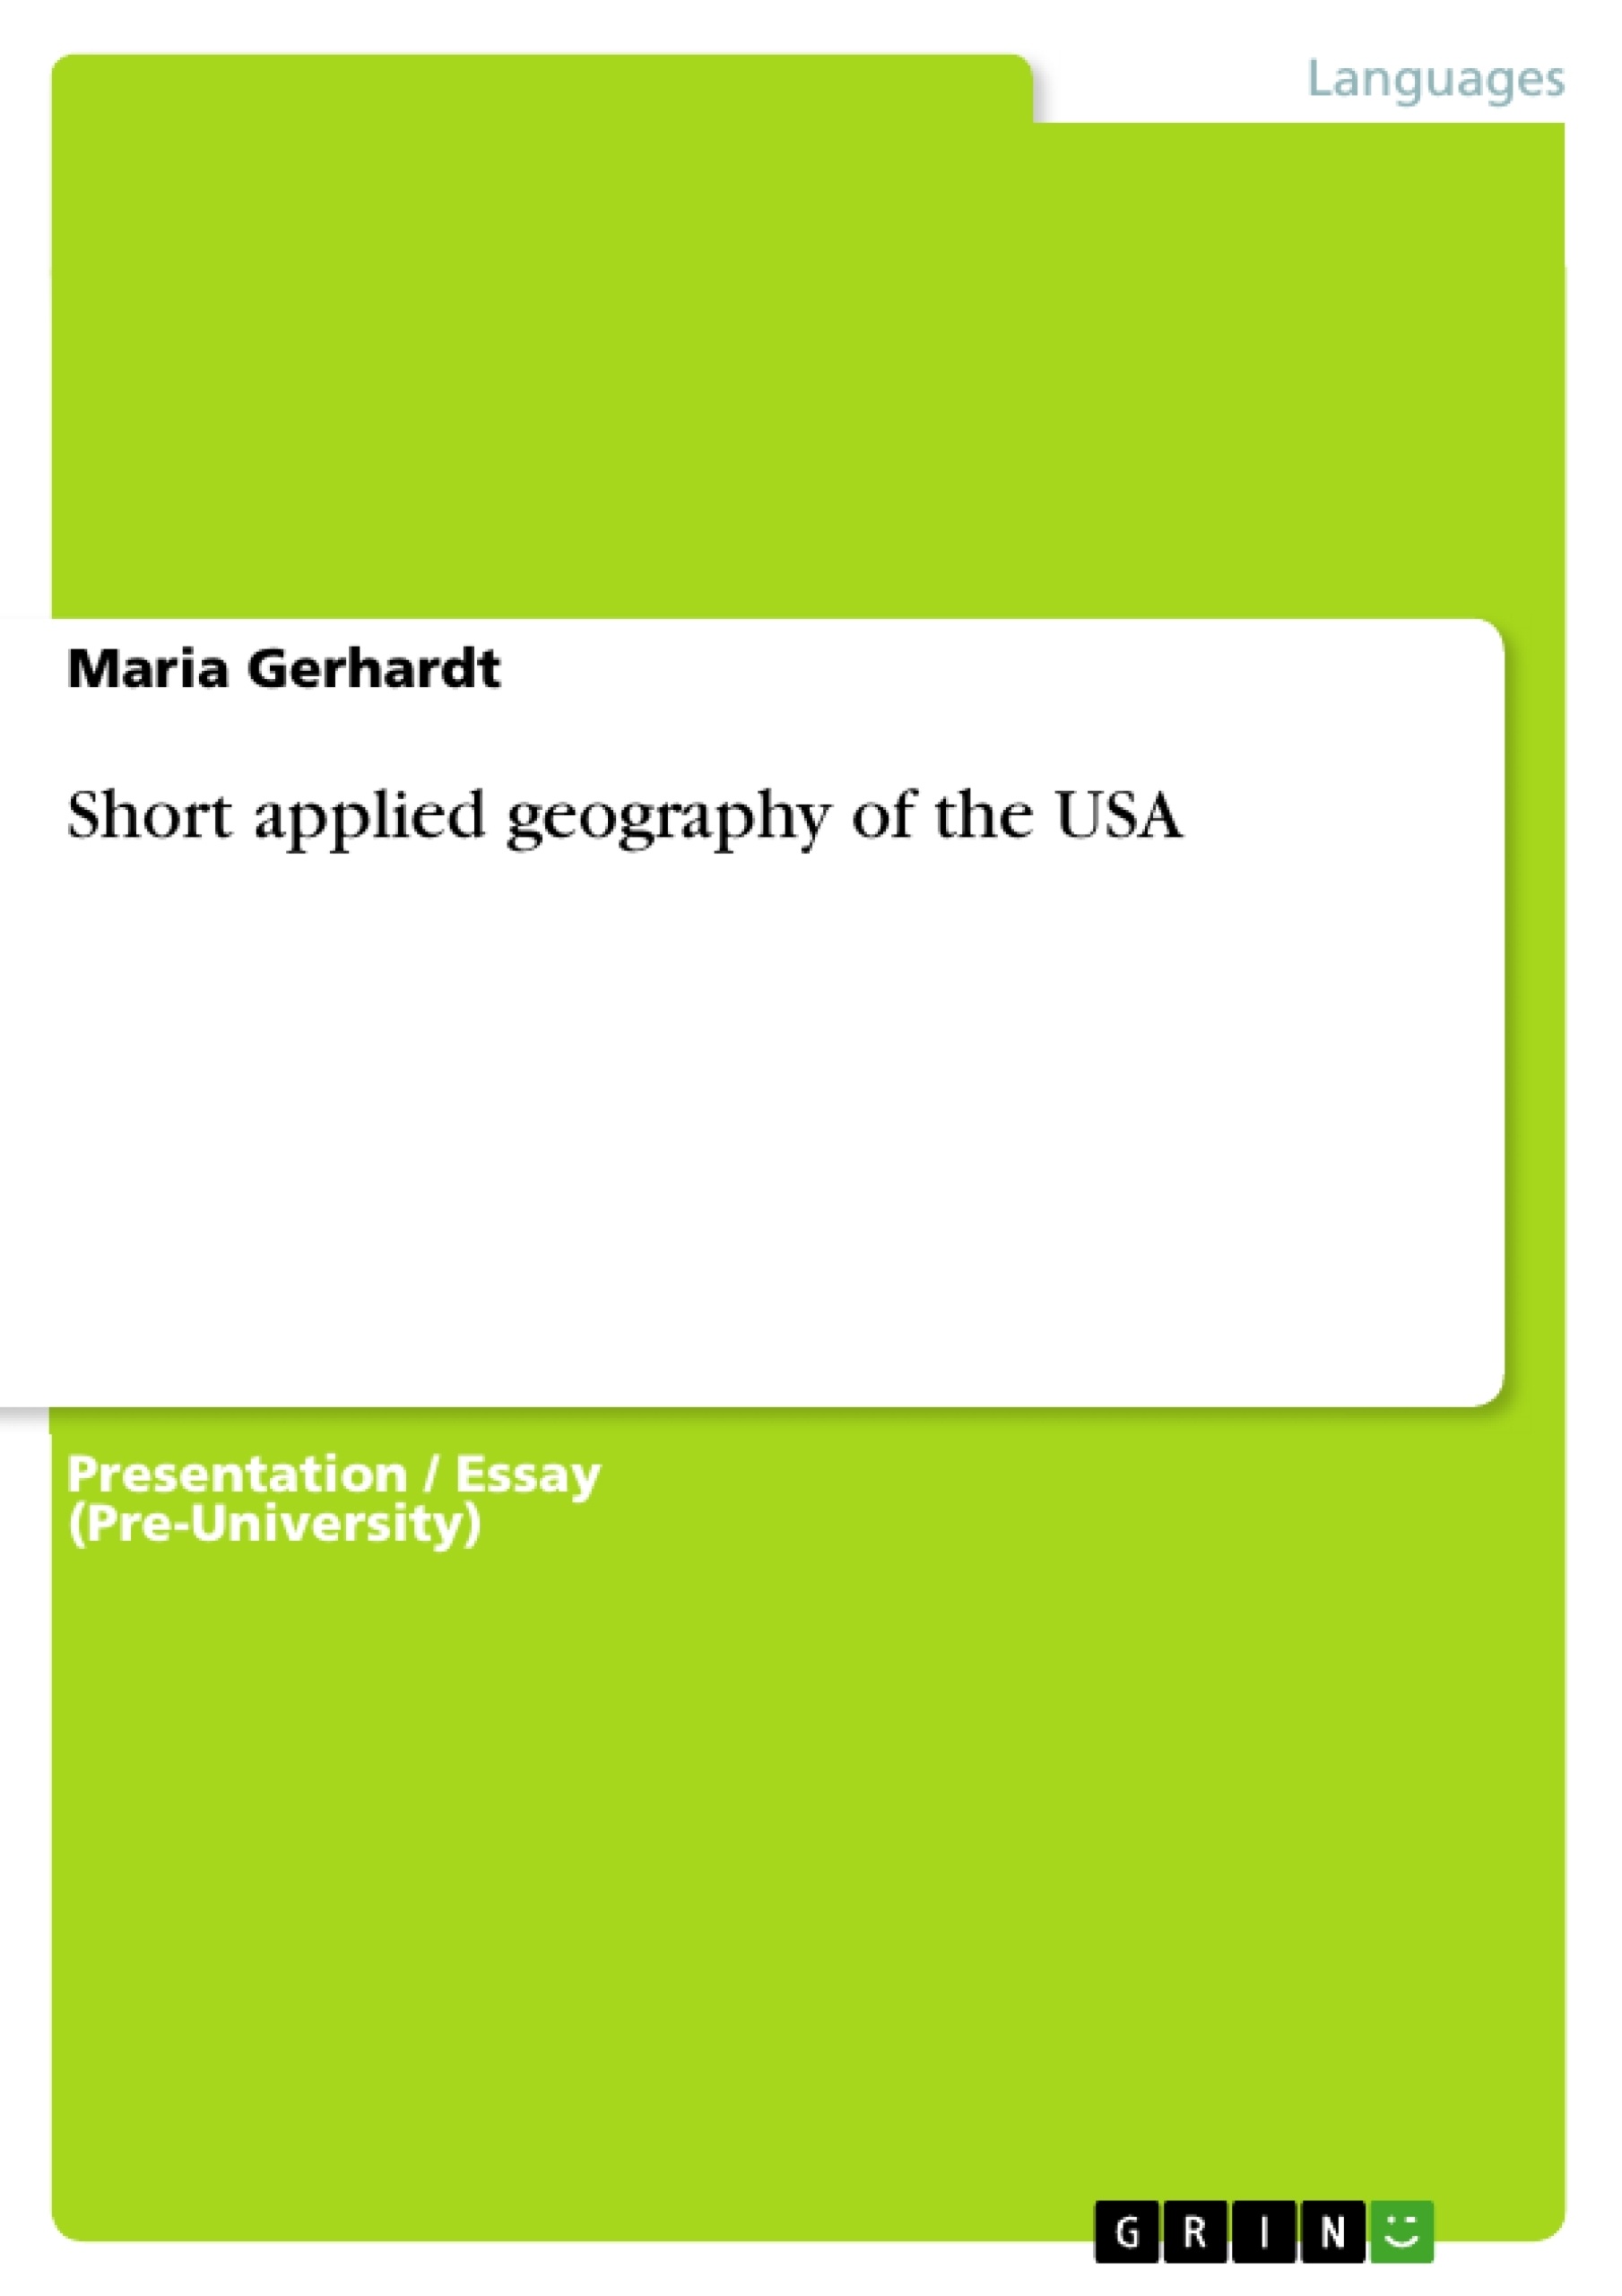 Title: Short applied geography of the USA